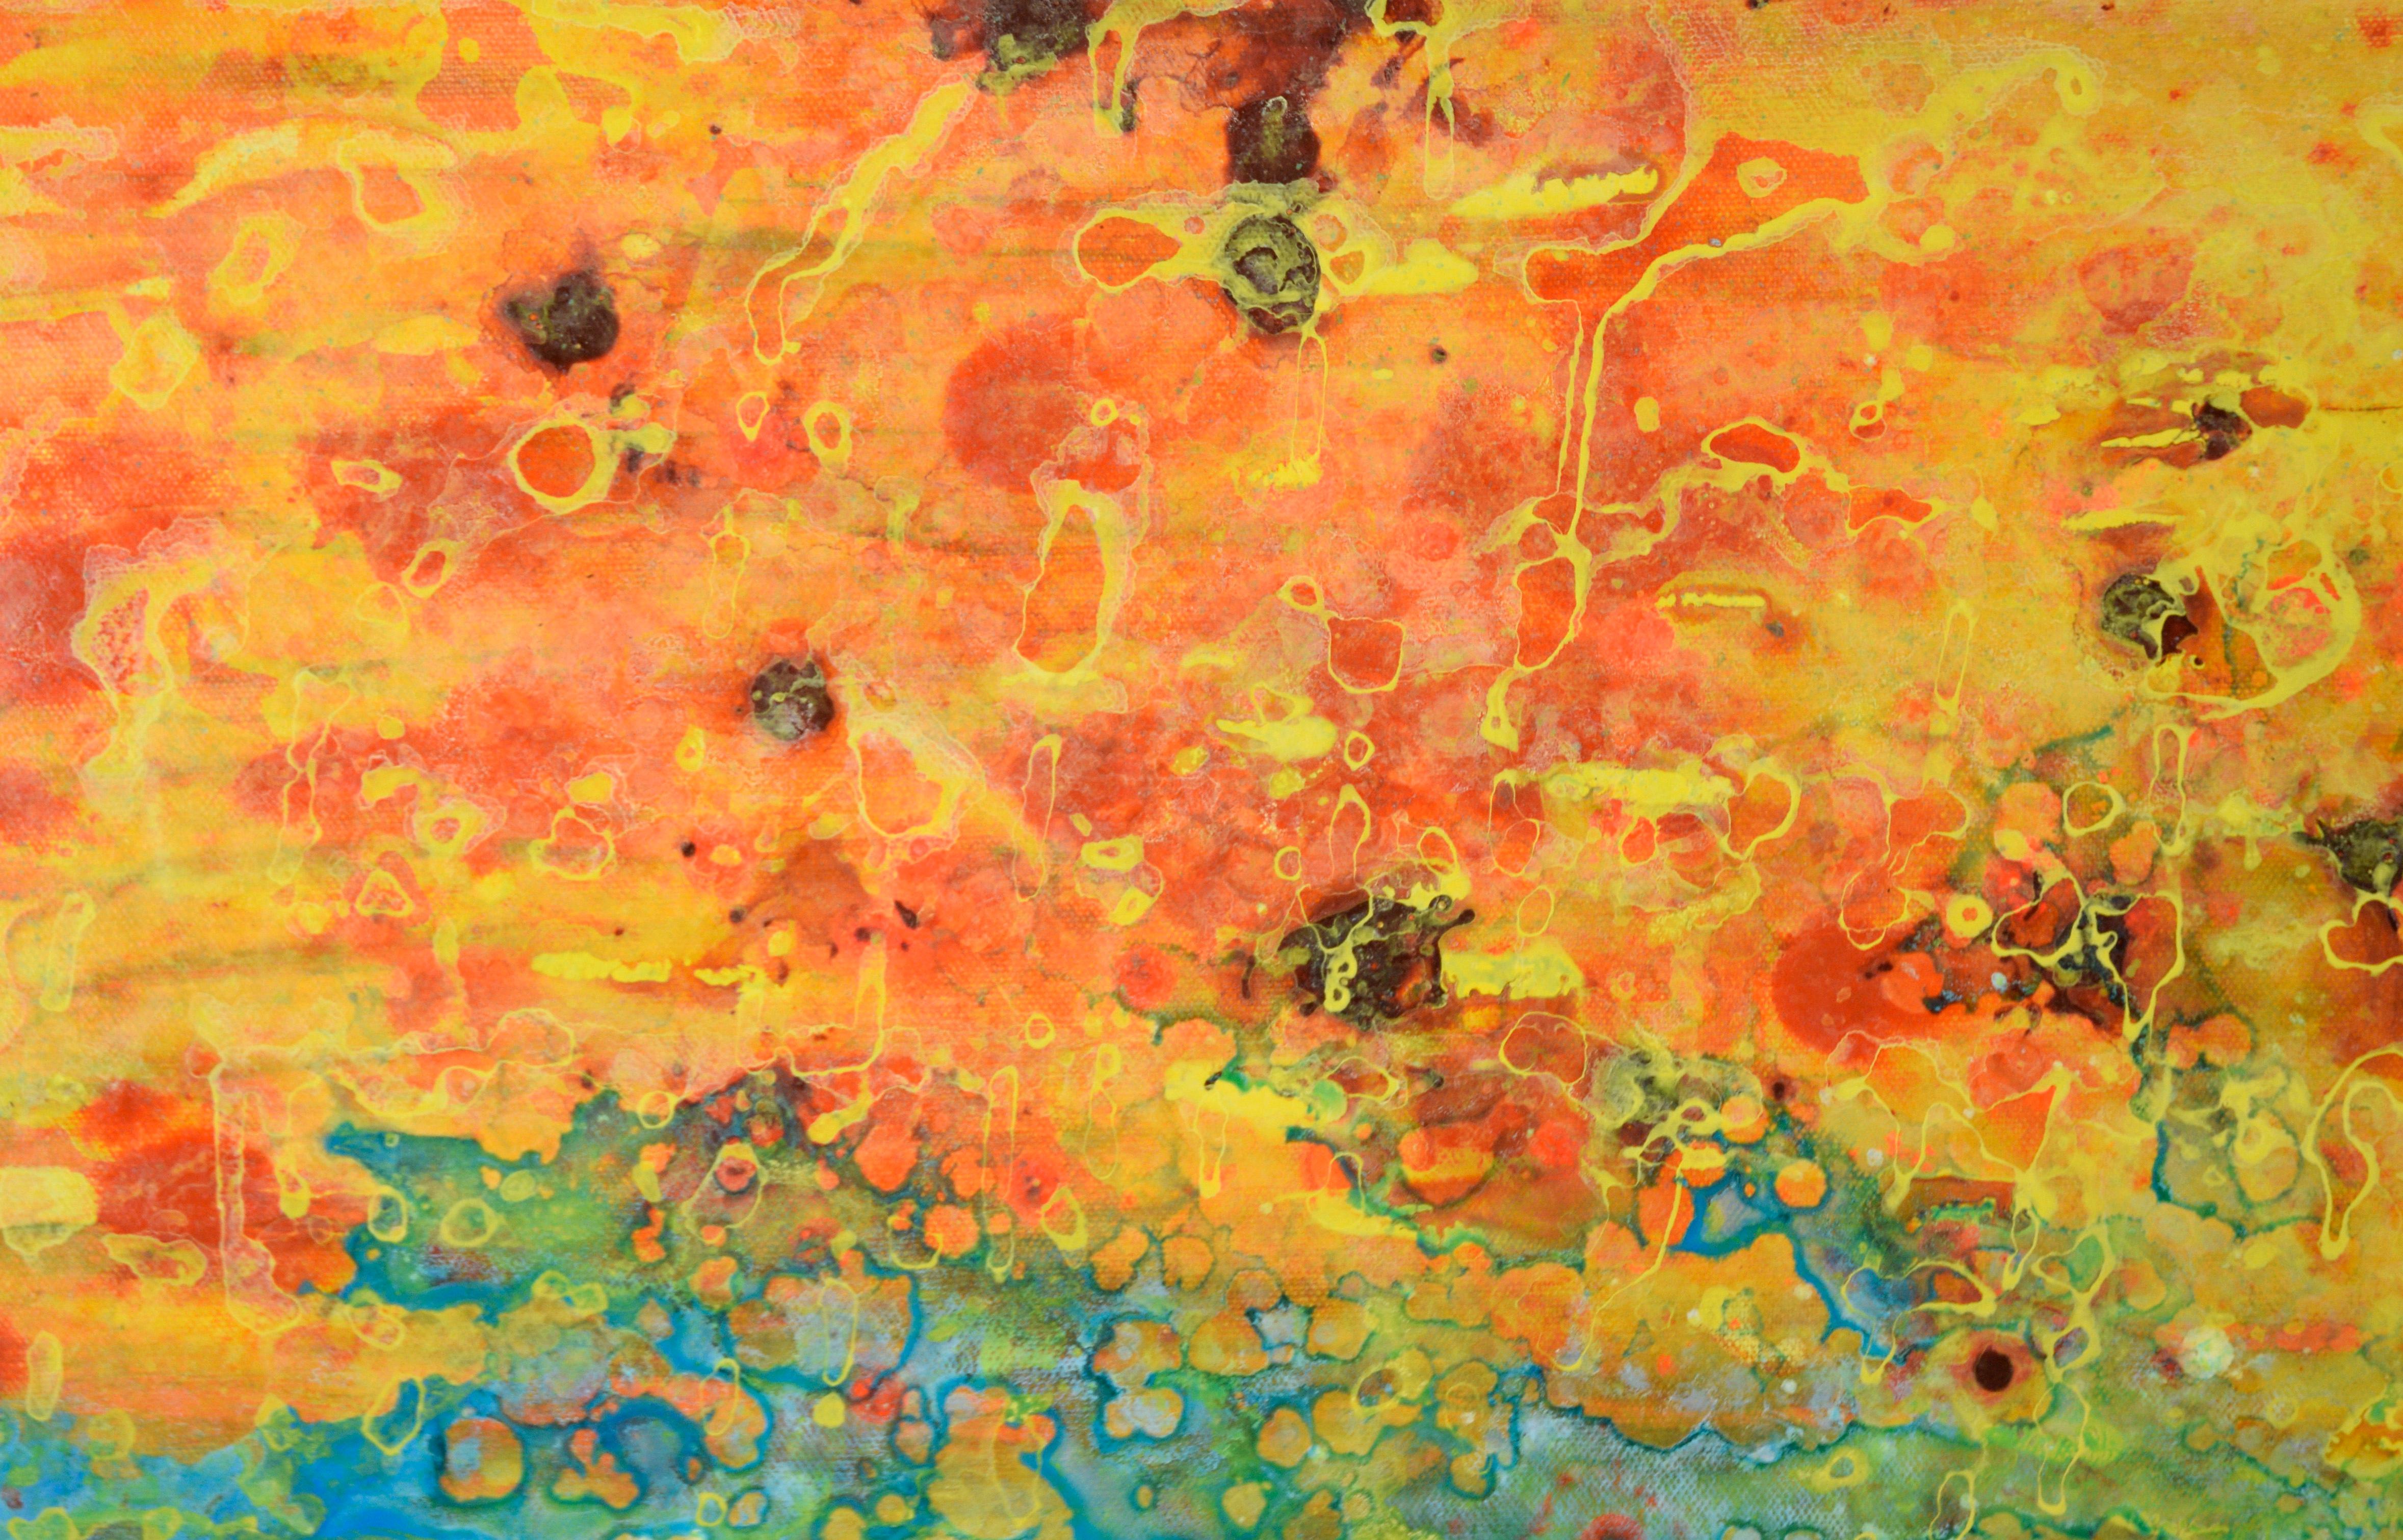 Fire and Water - Abstract Expressionist Composition in Acrylic on Canvas - Painting by Charles David Francis